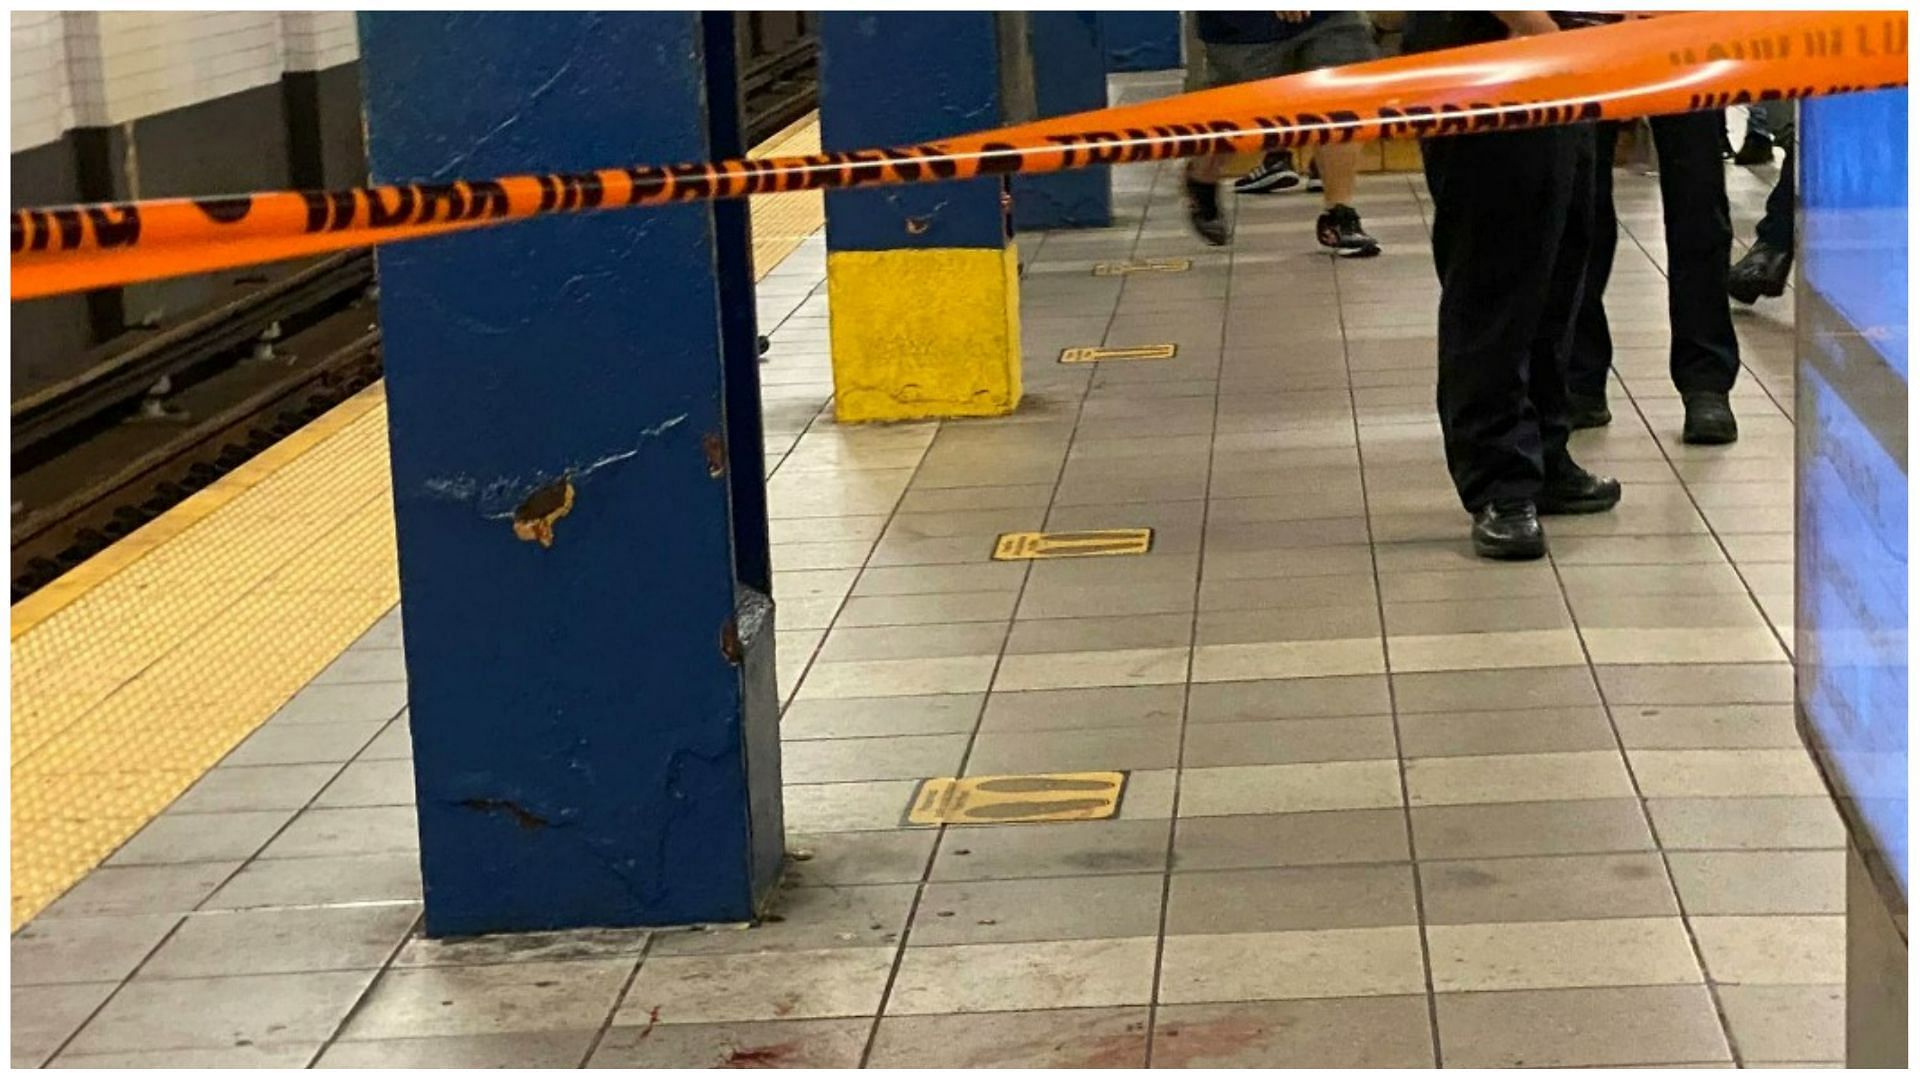 The subway station was cordoned off after the accident (Image via St. Vincent Times/Twitter)